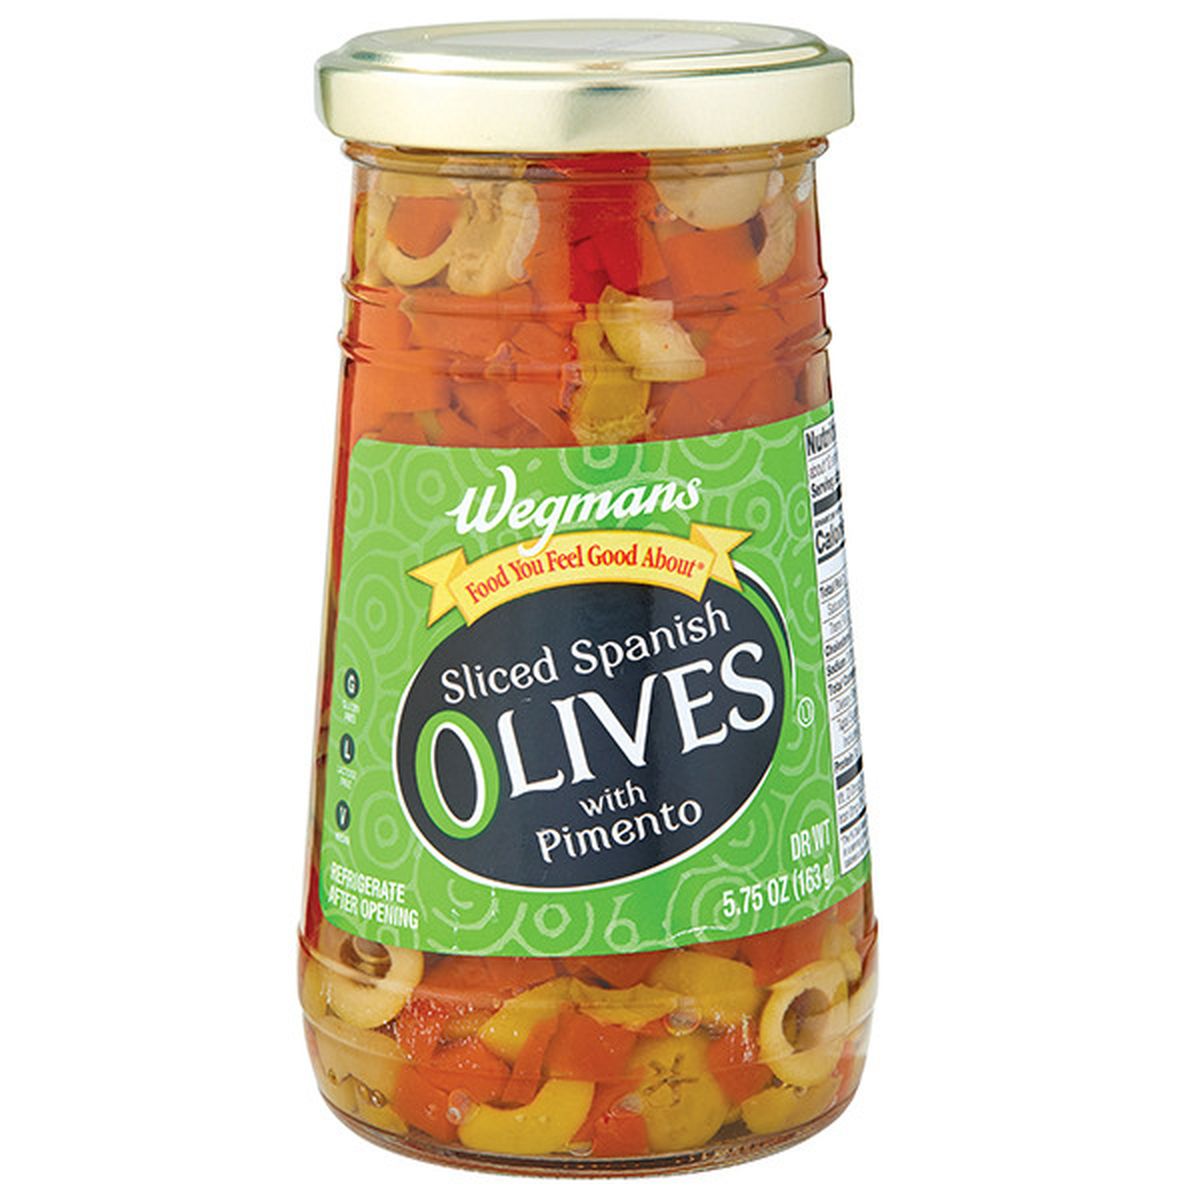 Calories in Wegmans Sliced Spanish Salad Olives with Pimento